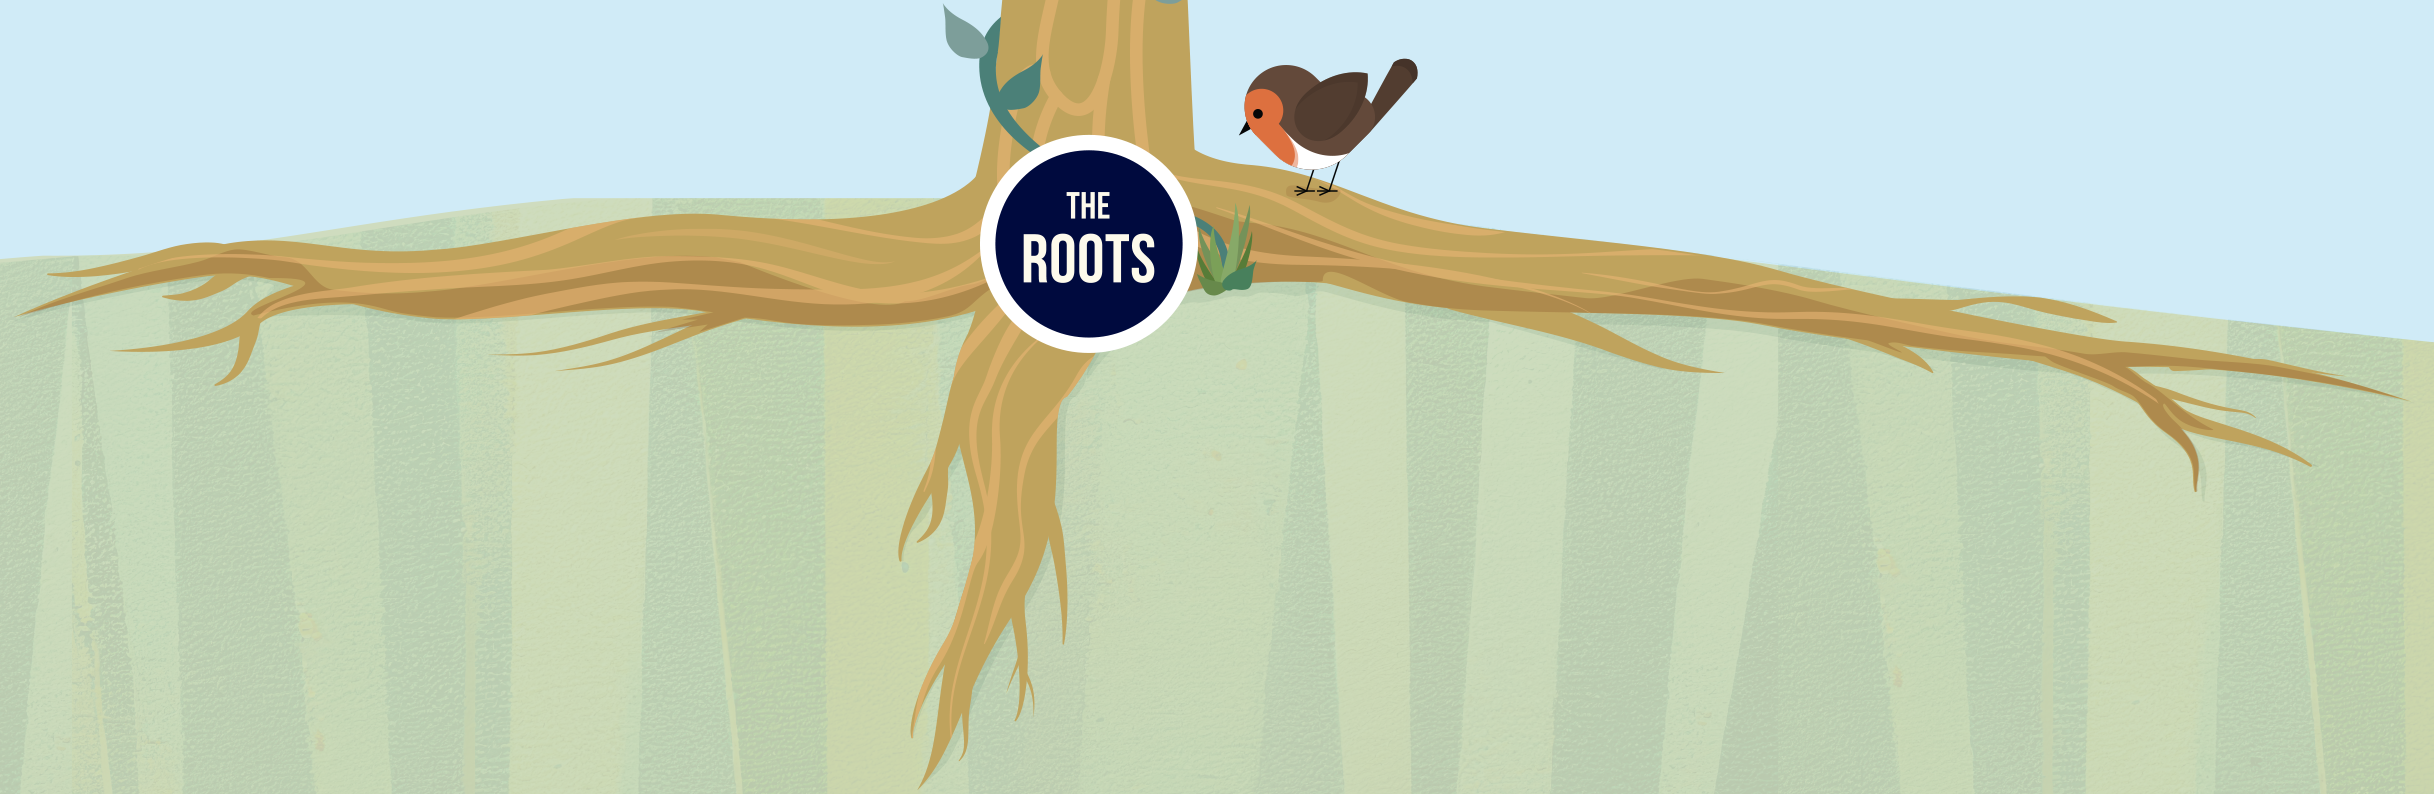 The roots section of the Benefits Tree. Click the image to return to the top